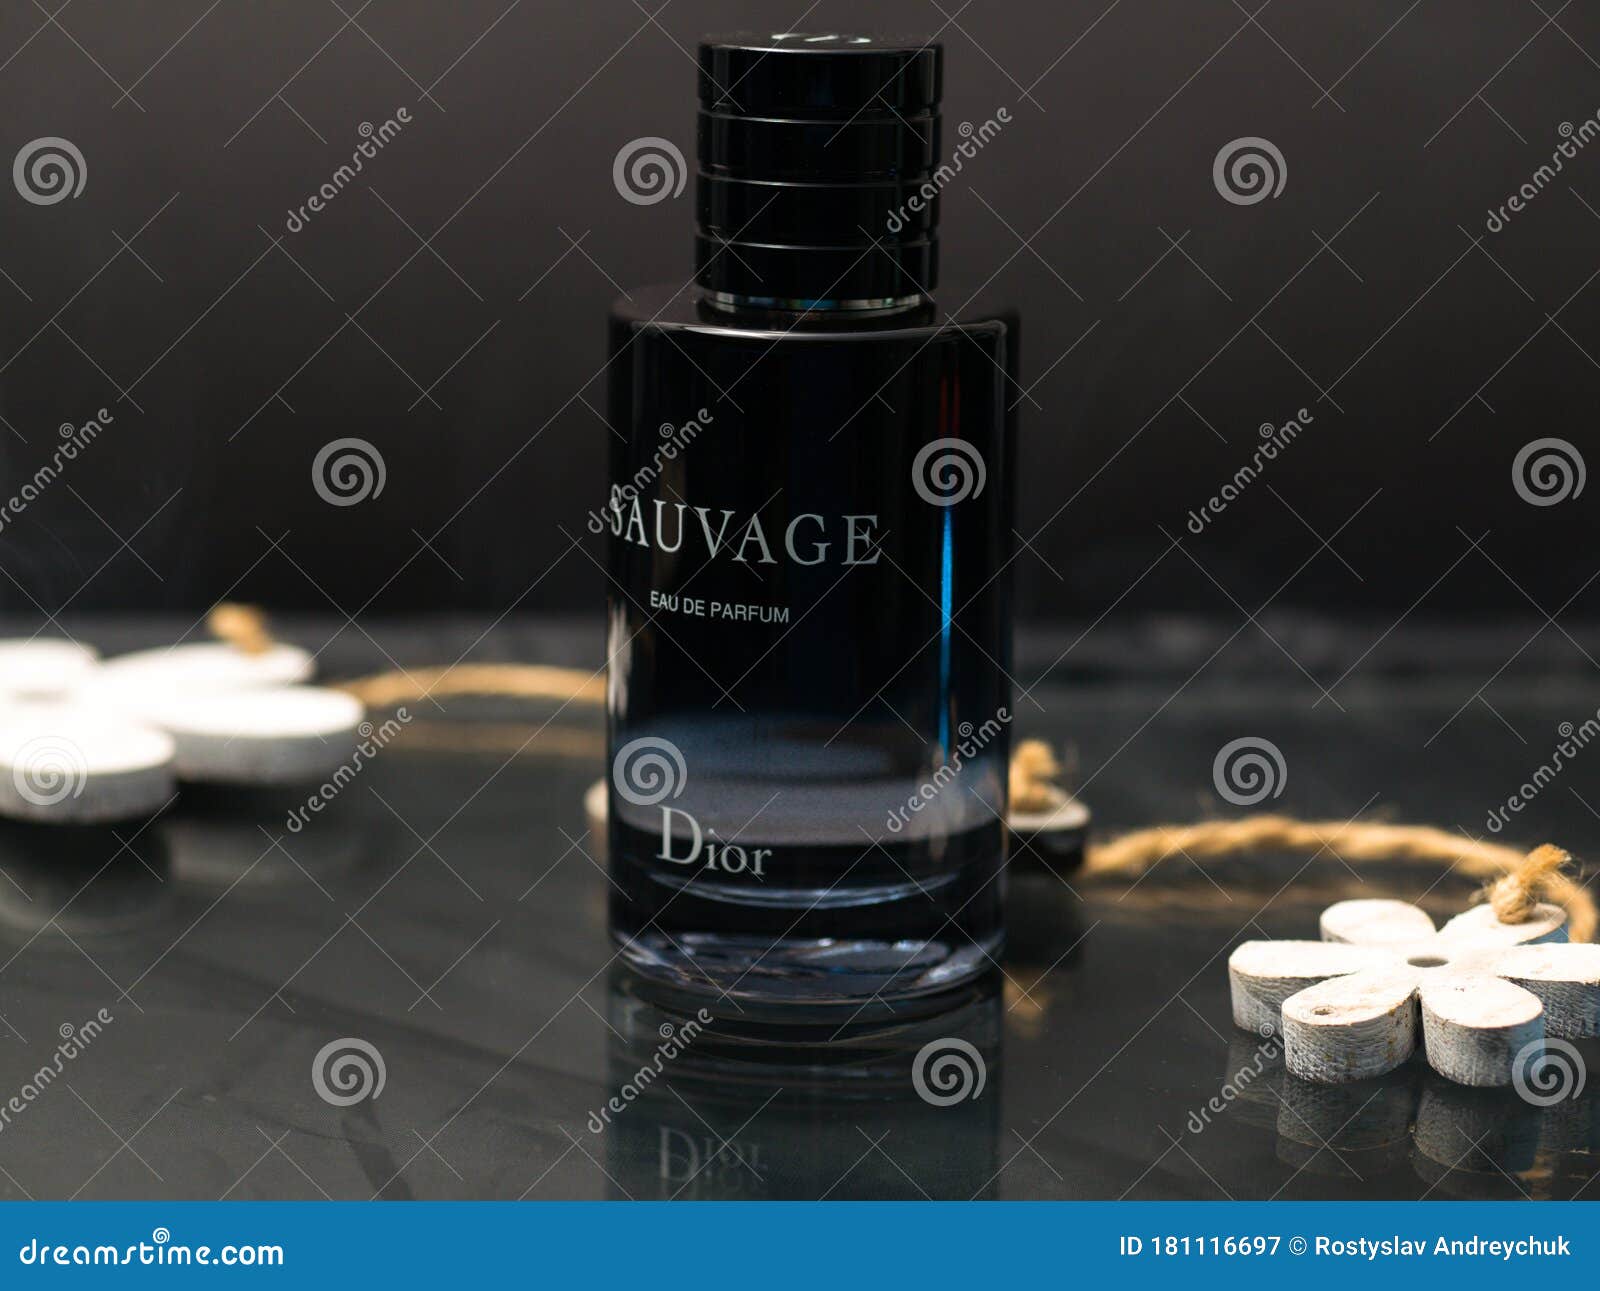 SAUVAGE Parfum by Dior. Aftershave Perfume Fragrance for Men by French